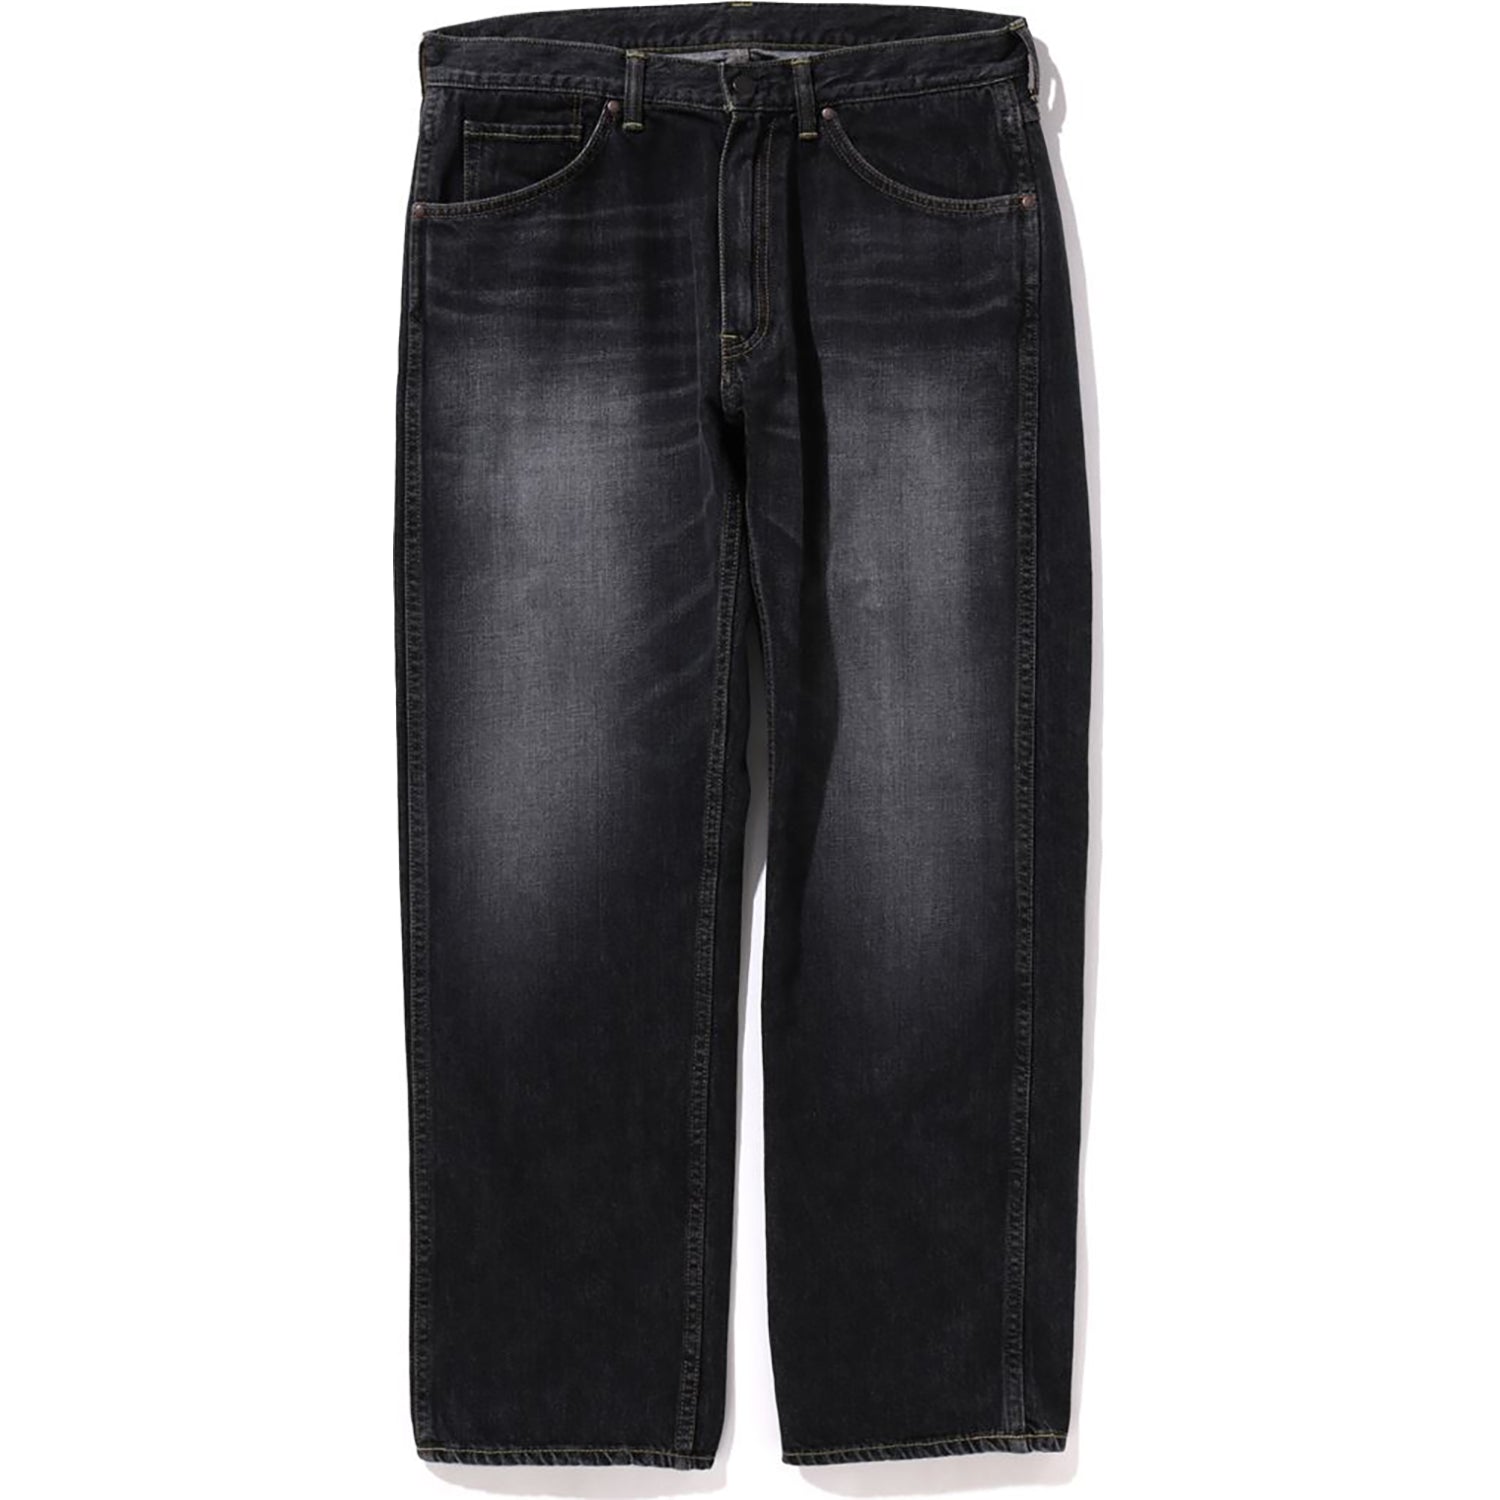 Jeans for Men - Buy Stylish Jeans for Men, Jeans Pants at SELECTED HOMME